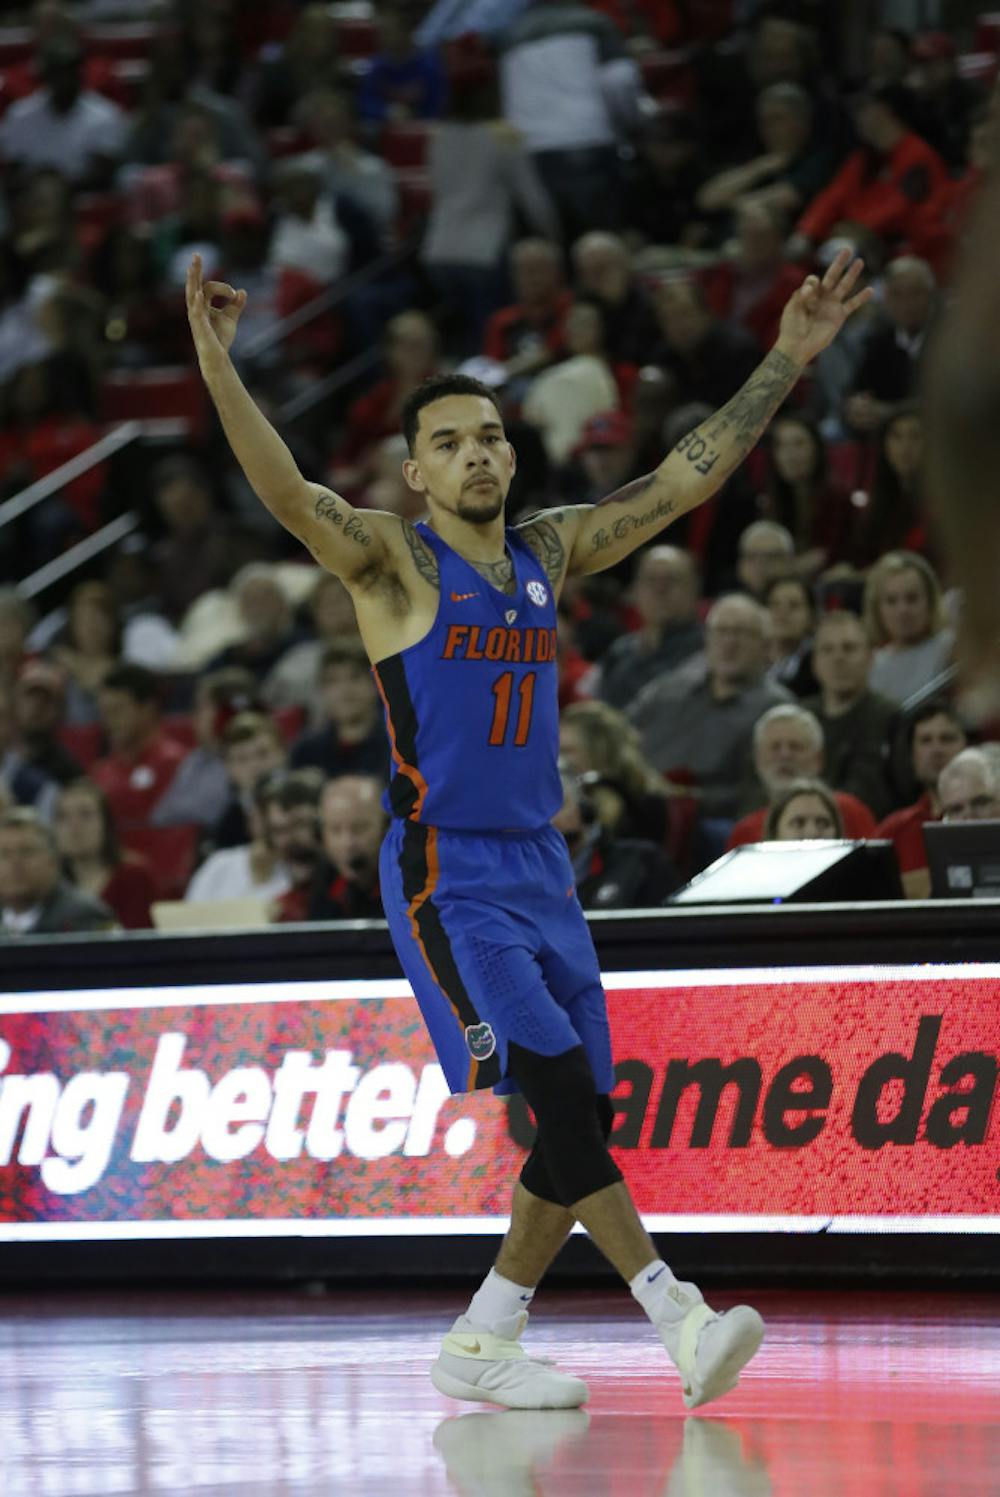 <p>Florida guard Chris Chiozza (11) reacts after hitting a 3-point shot during the second half of the team's NCAA college basketball game against Georgia on Tuesday, Feb. 7, 2017, in Athens, Ga. Florida won 72-60. (AP Photo/John Bazemore)</p>